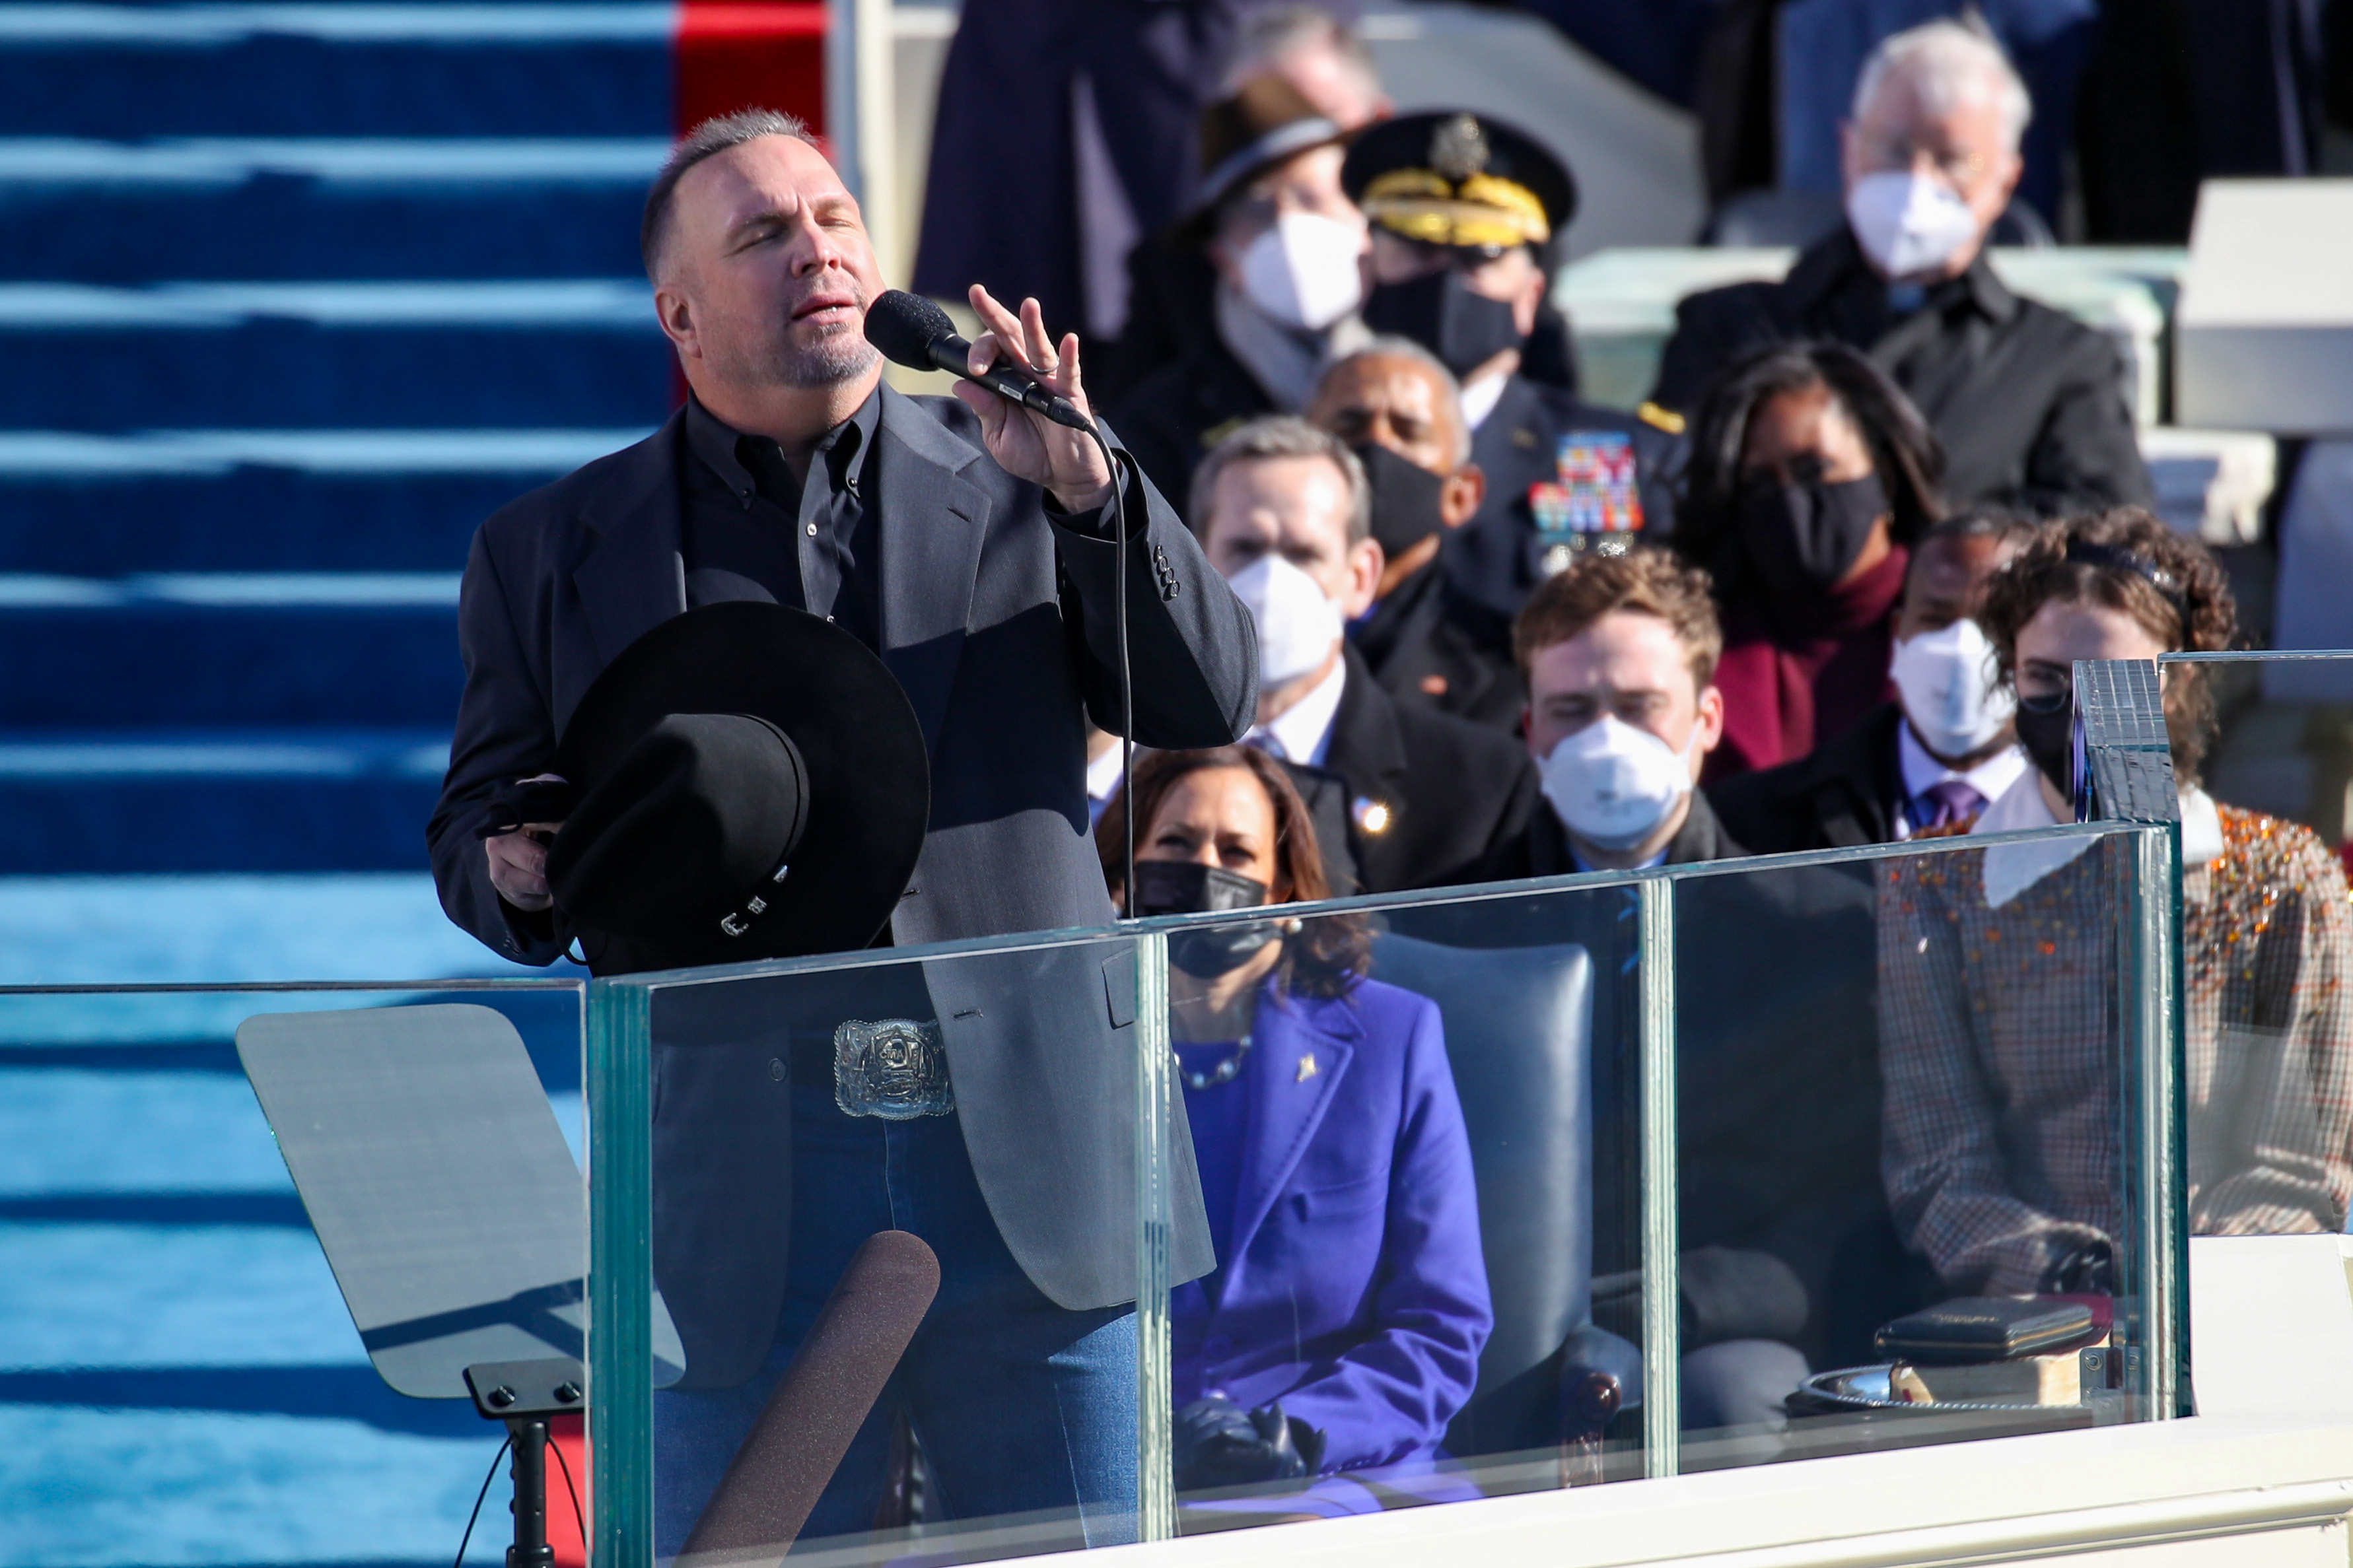 Garth Brooks performs "Amazing Grace" at President Joe Biden's inauguration. (Getty Images—2021 Getty Images)